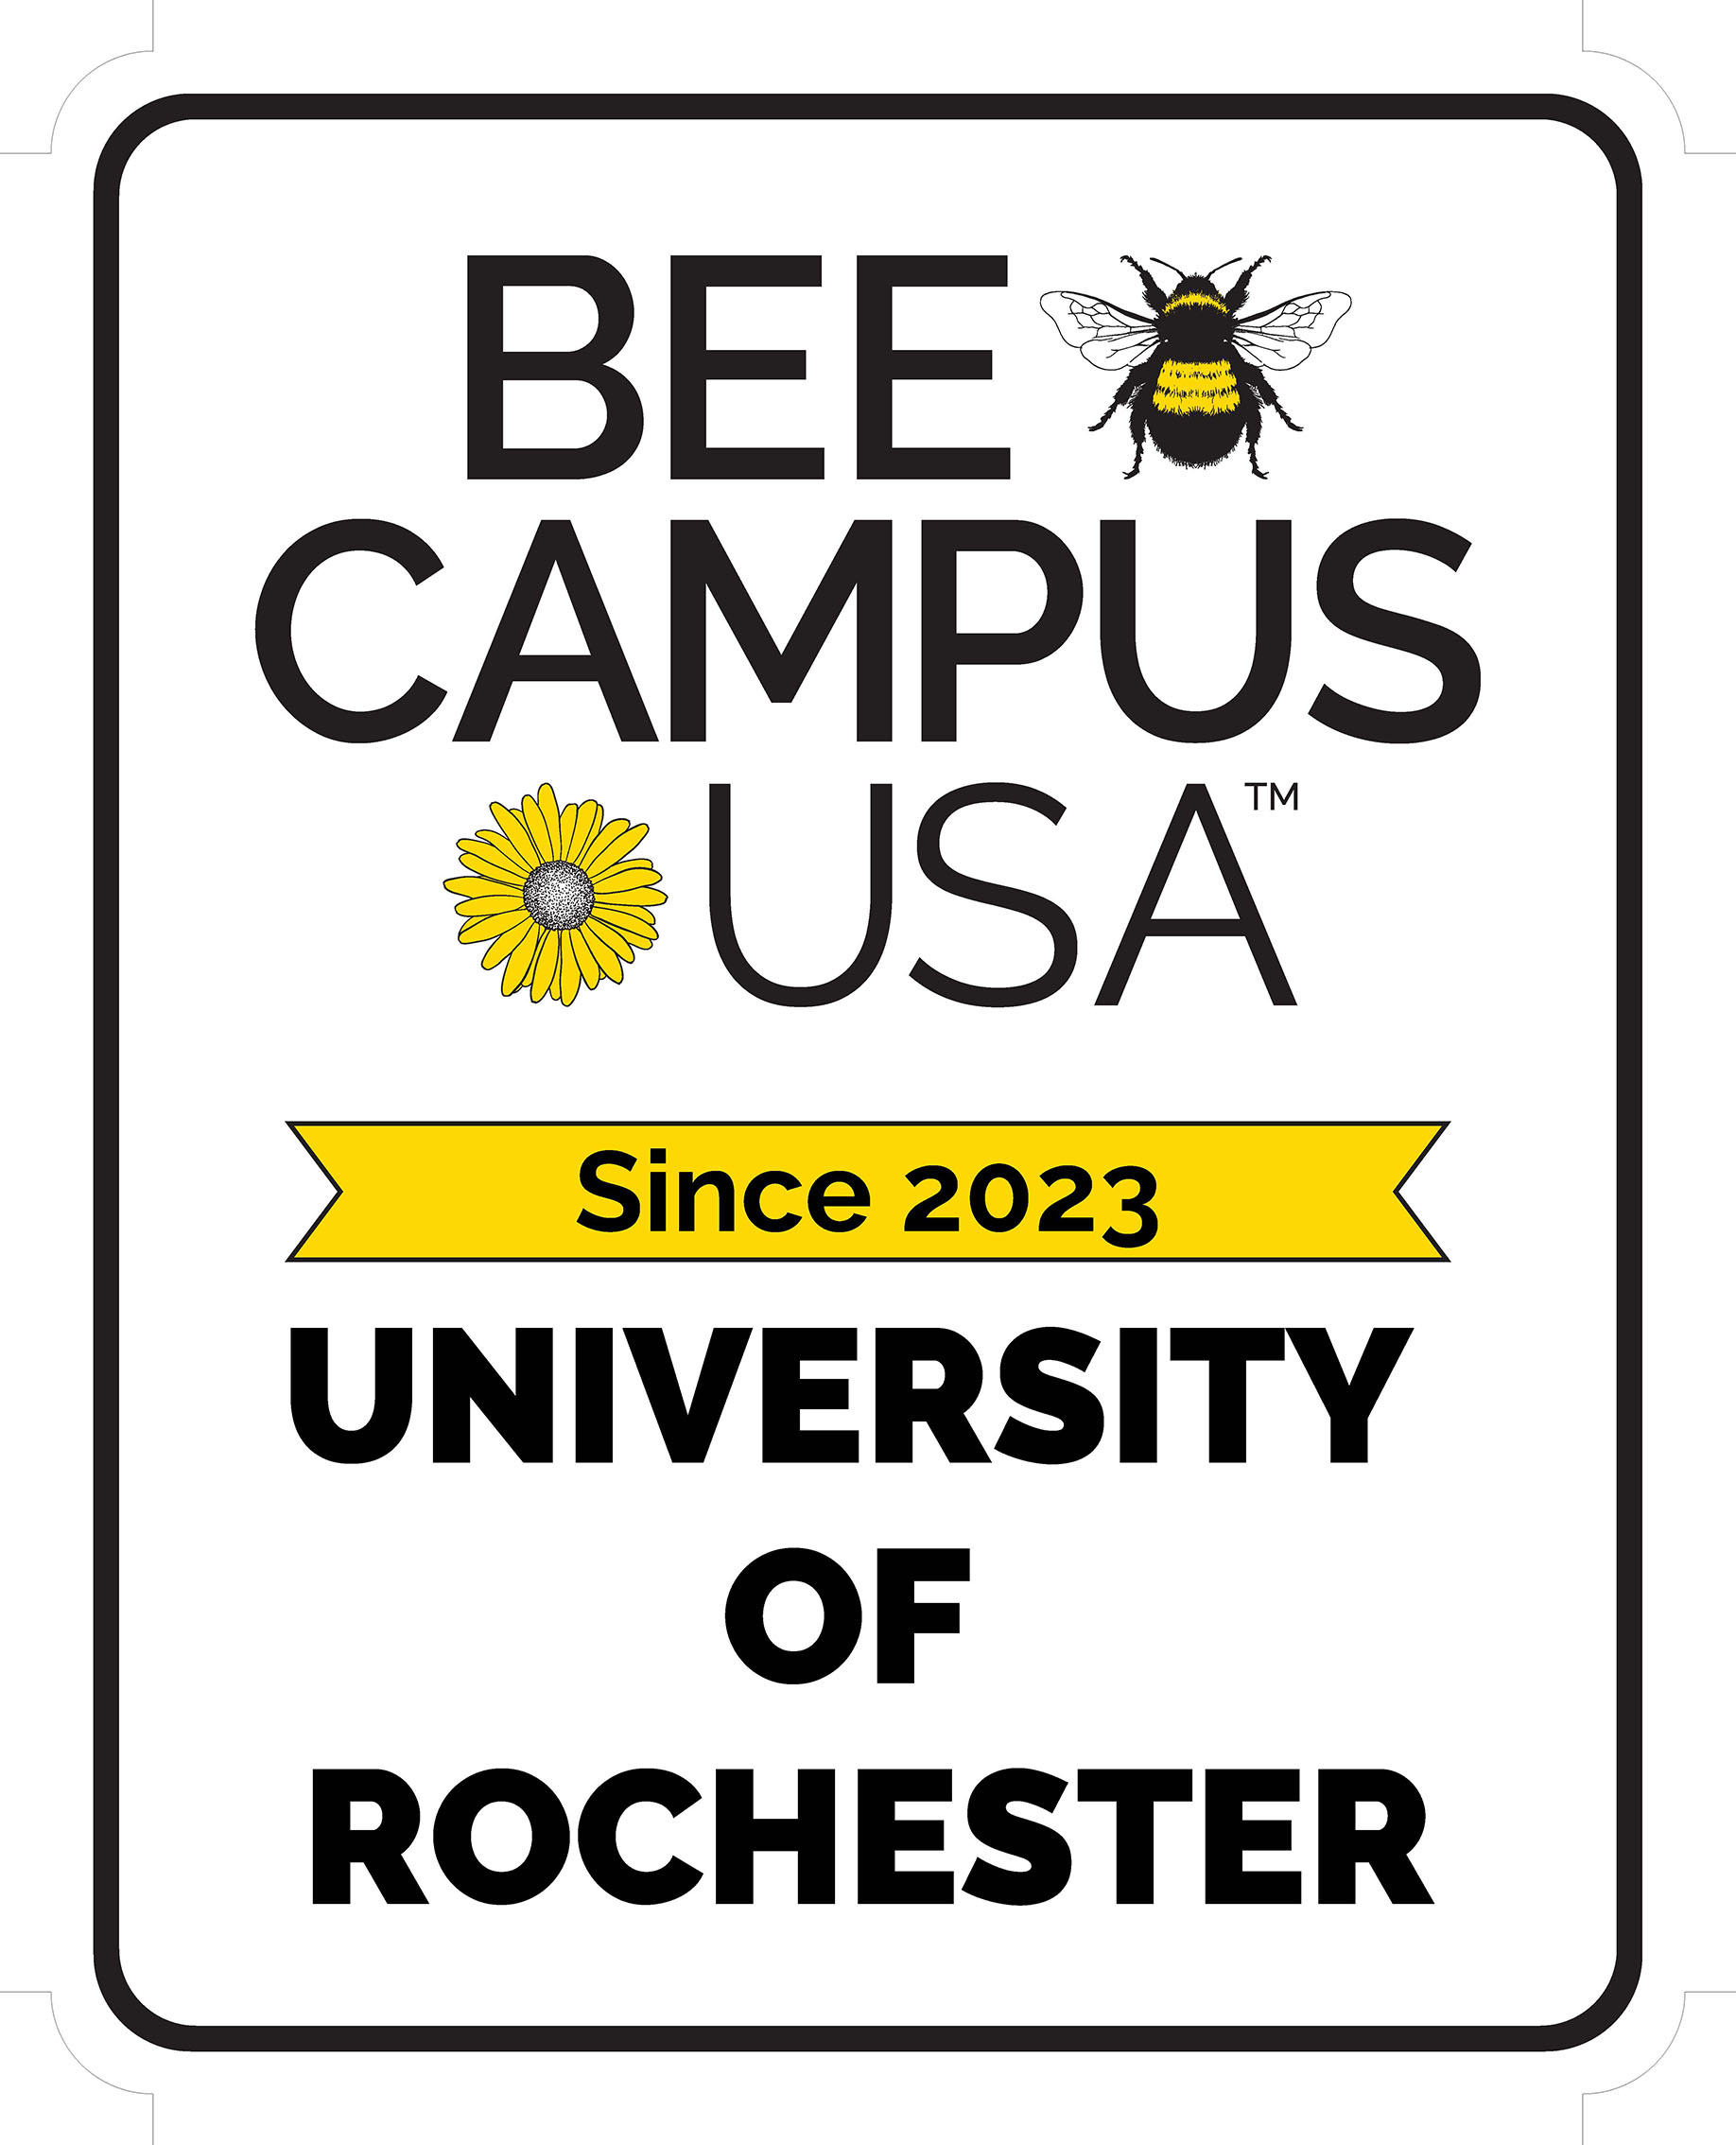 Vertical sign with words Bee Campus USA, University of Rochester, since 2023.